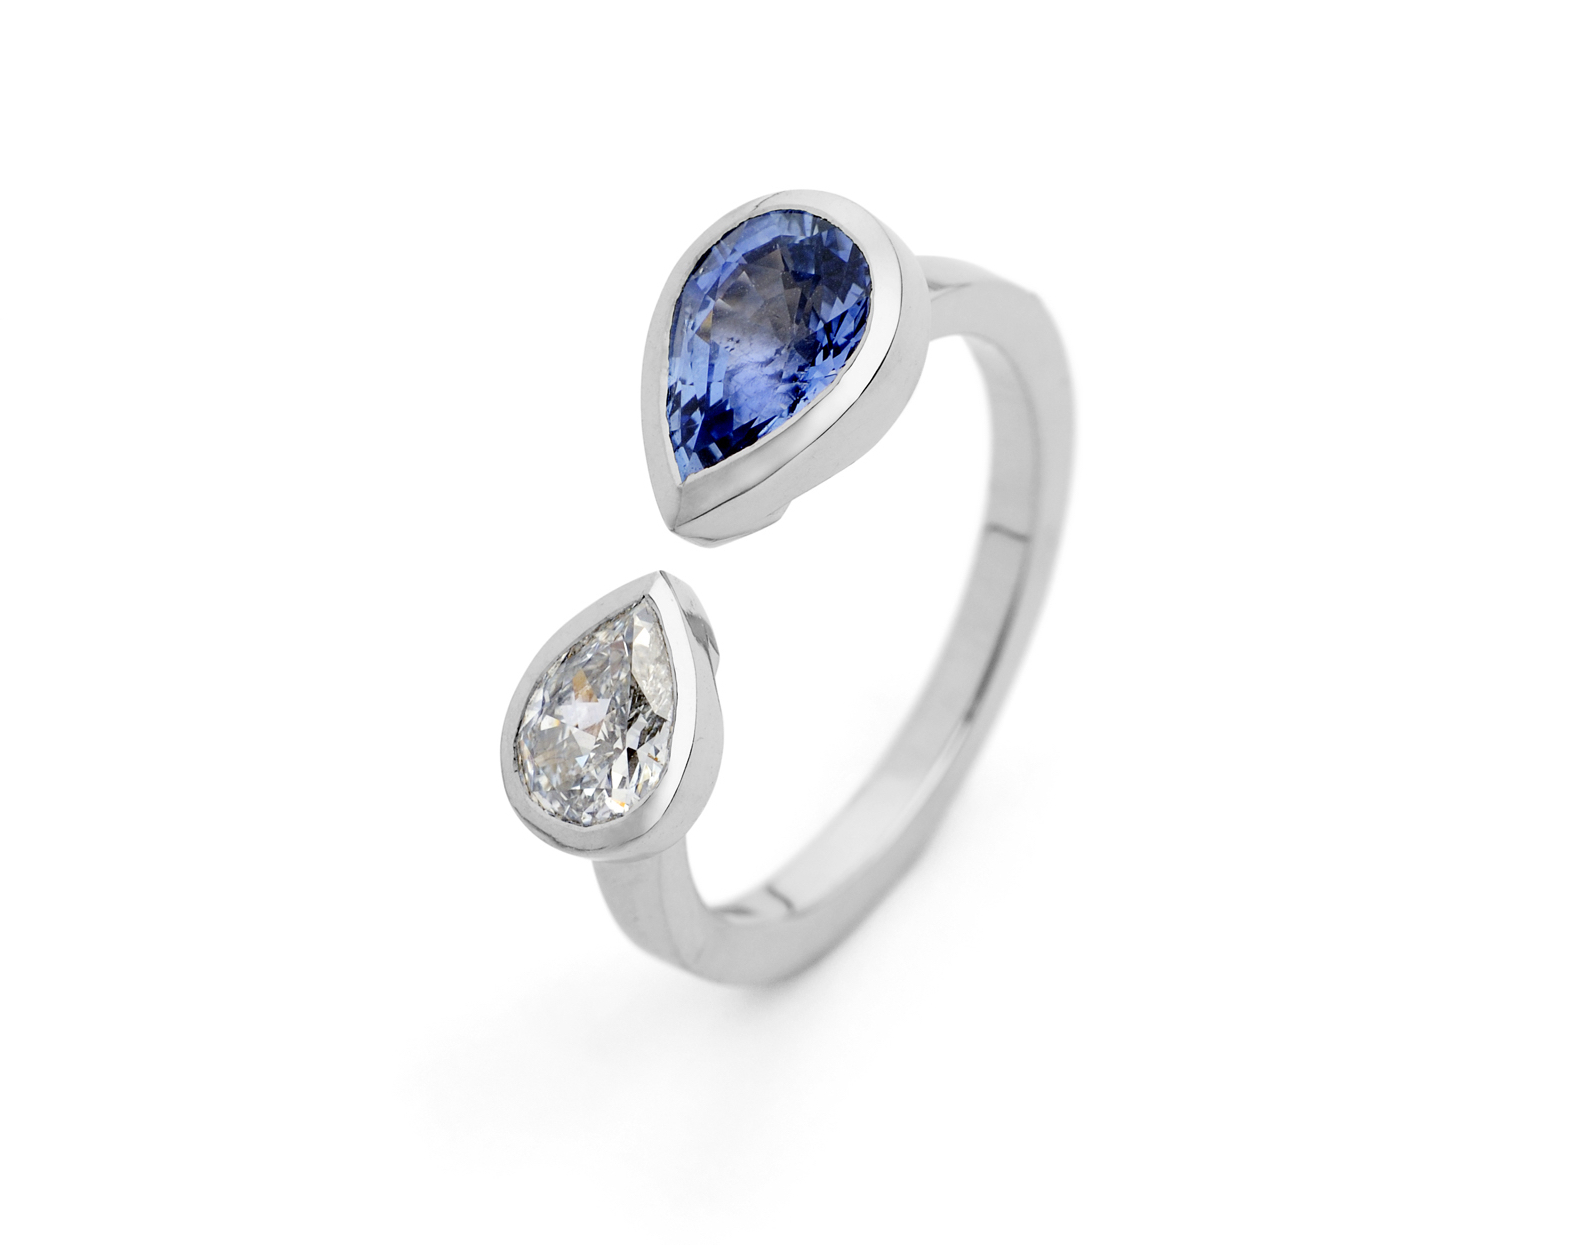 Sapphire and diamond two stone engagement ring